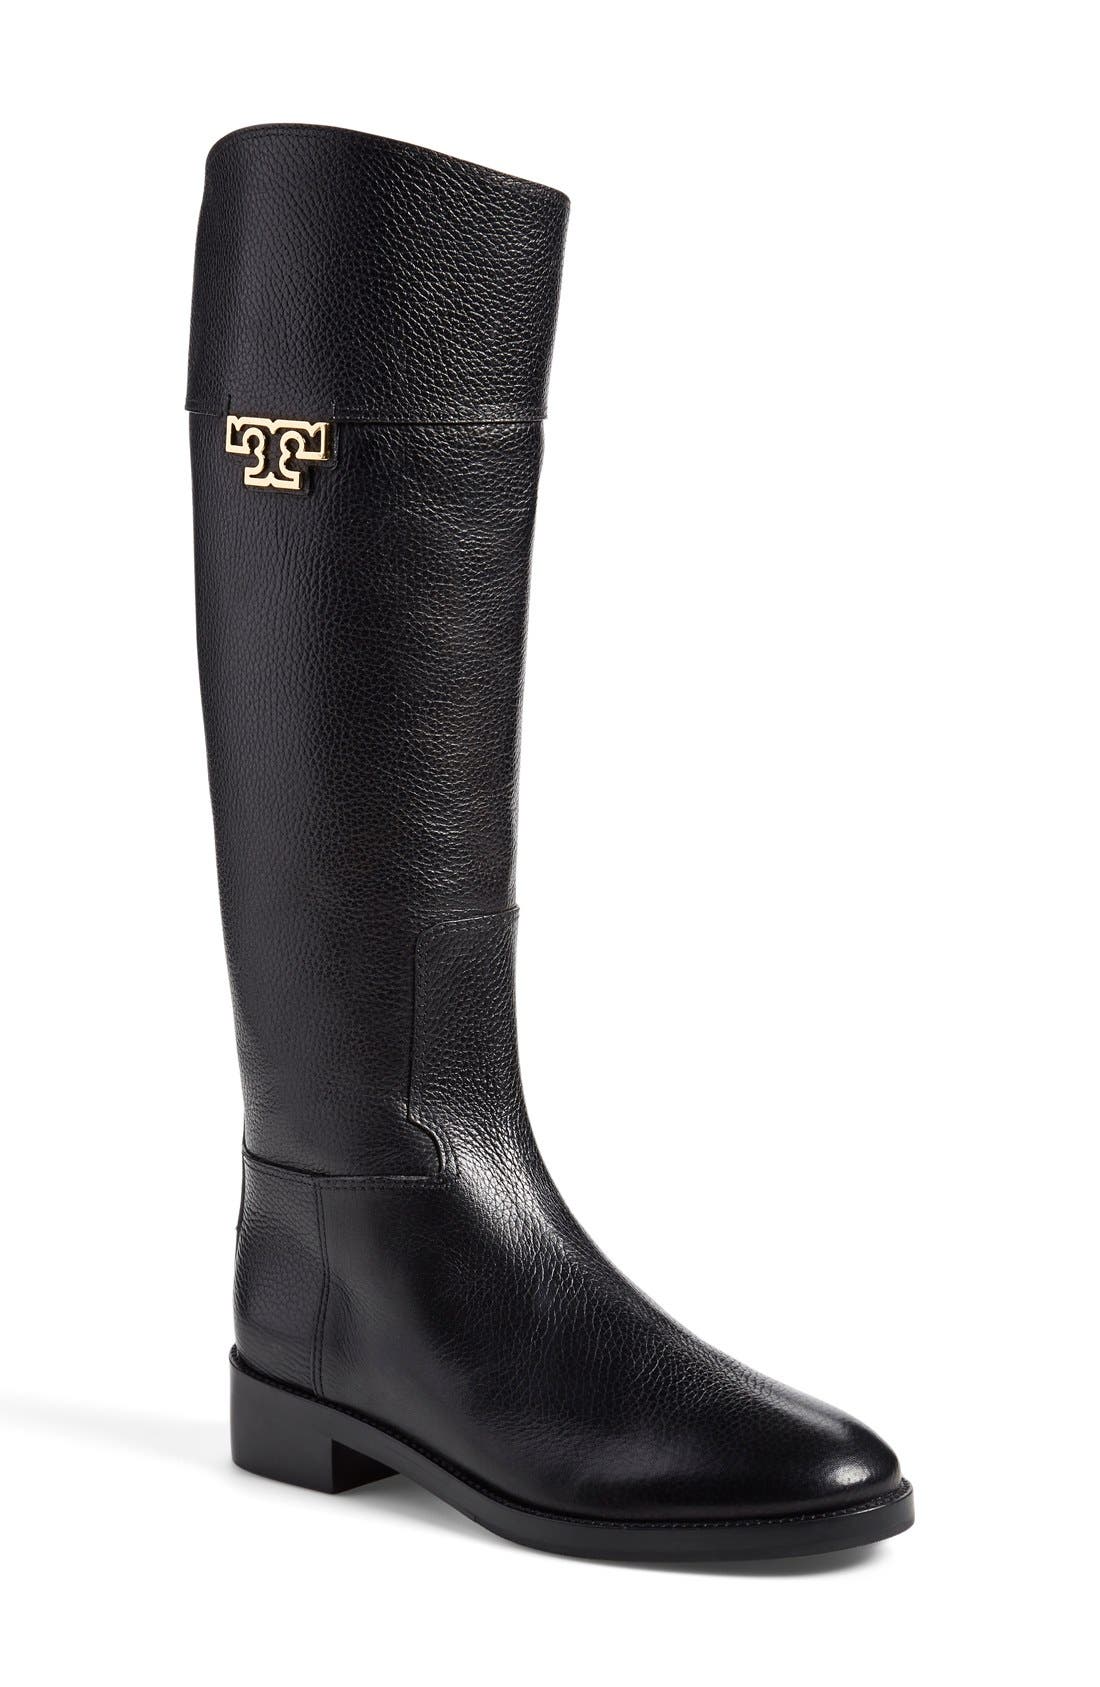 tory burch nadine riding boots